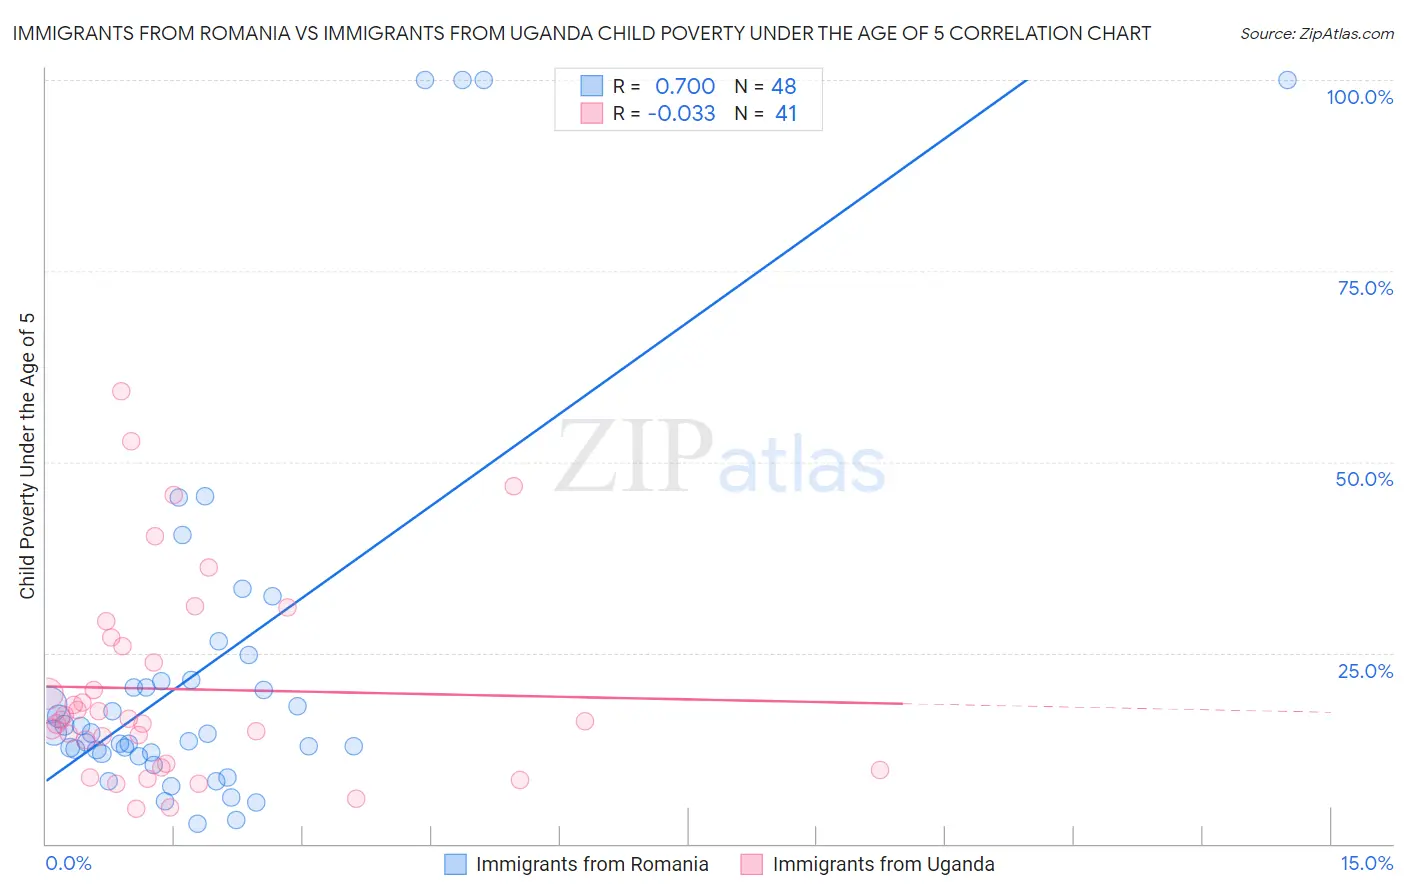 Immigrants from Romania vs Immigrants from Uganda Child Poverty Under the Age of 5